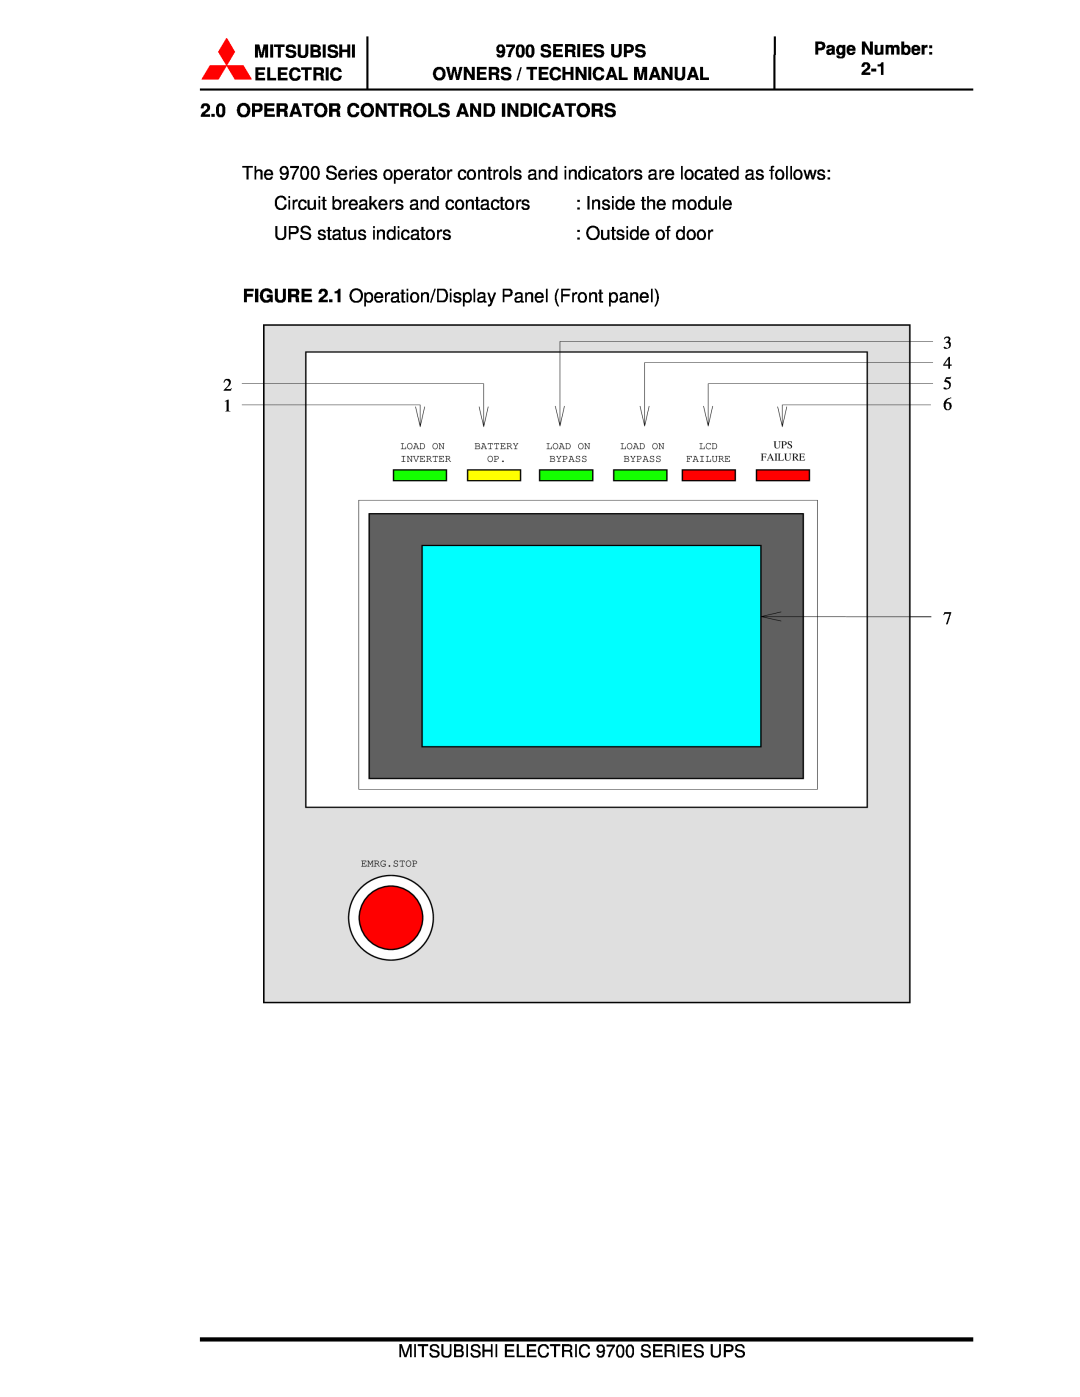 Mitsubishi Electronics 9700 Series Operator Controls And Indicators, Page Number, Load On, Inverter, Emrg.Stop, Battery 